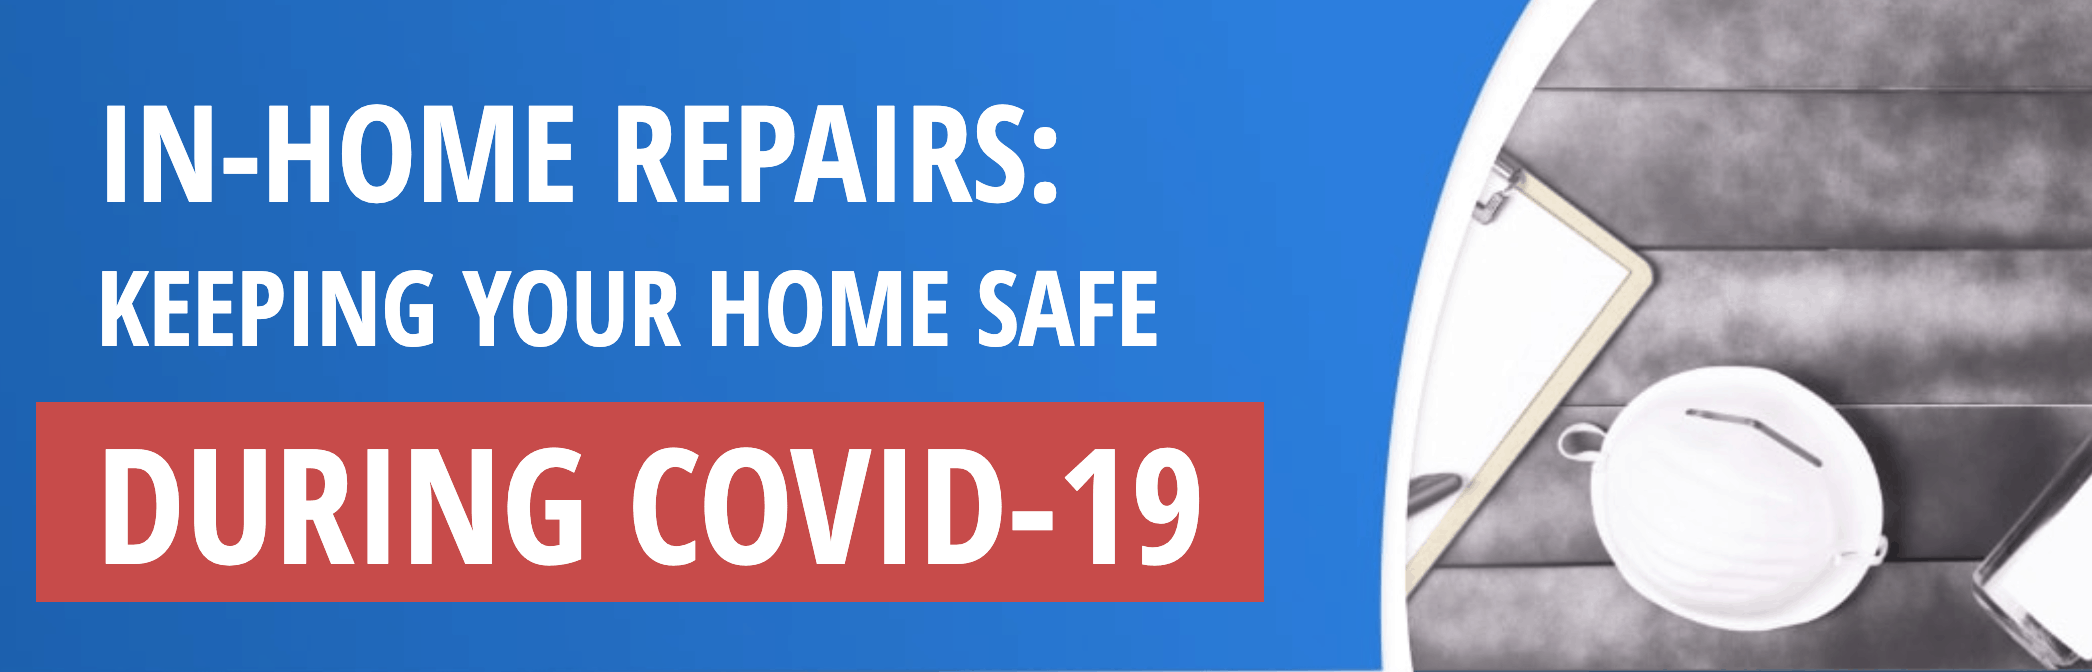 In-Home Repairs: Keeping Your Home Safe During COVID-19 Featured Image